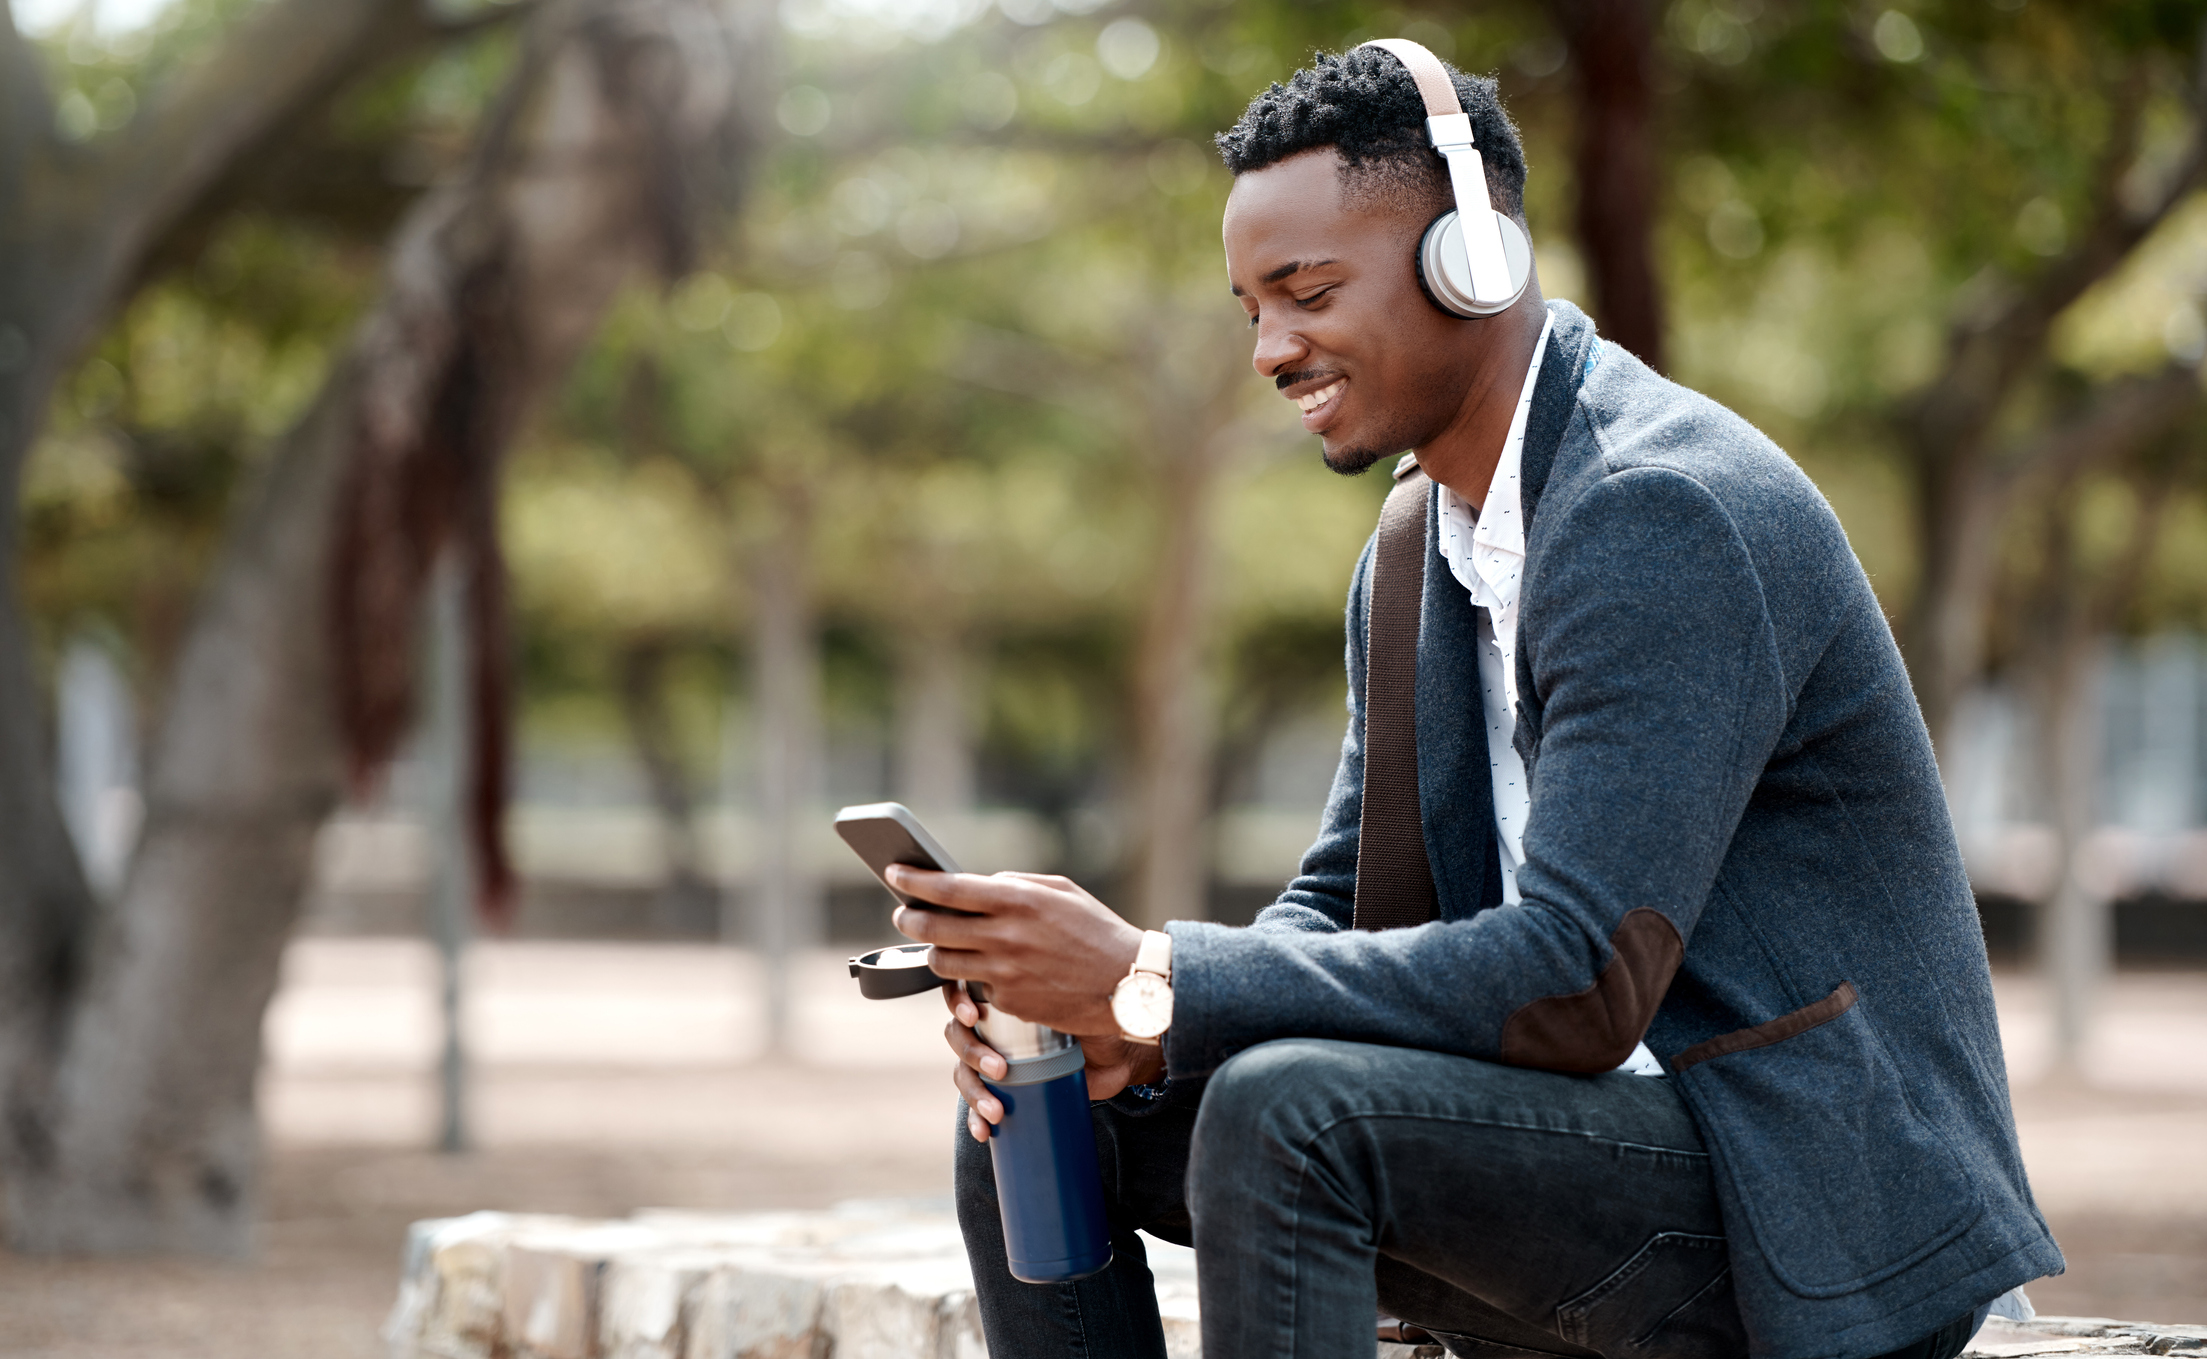 Use Music to Improve Your Health